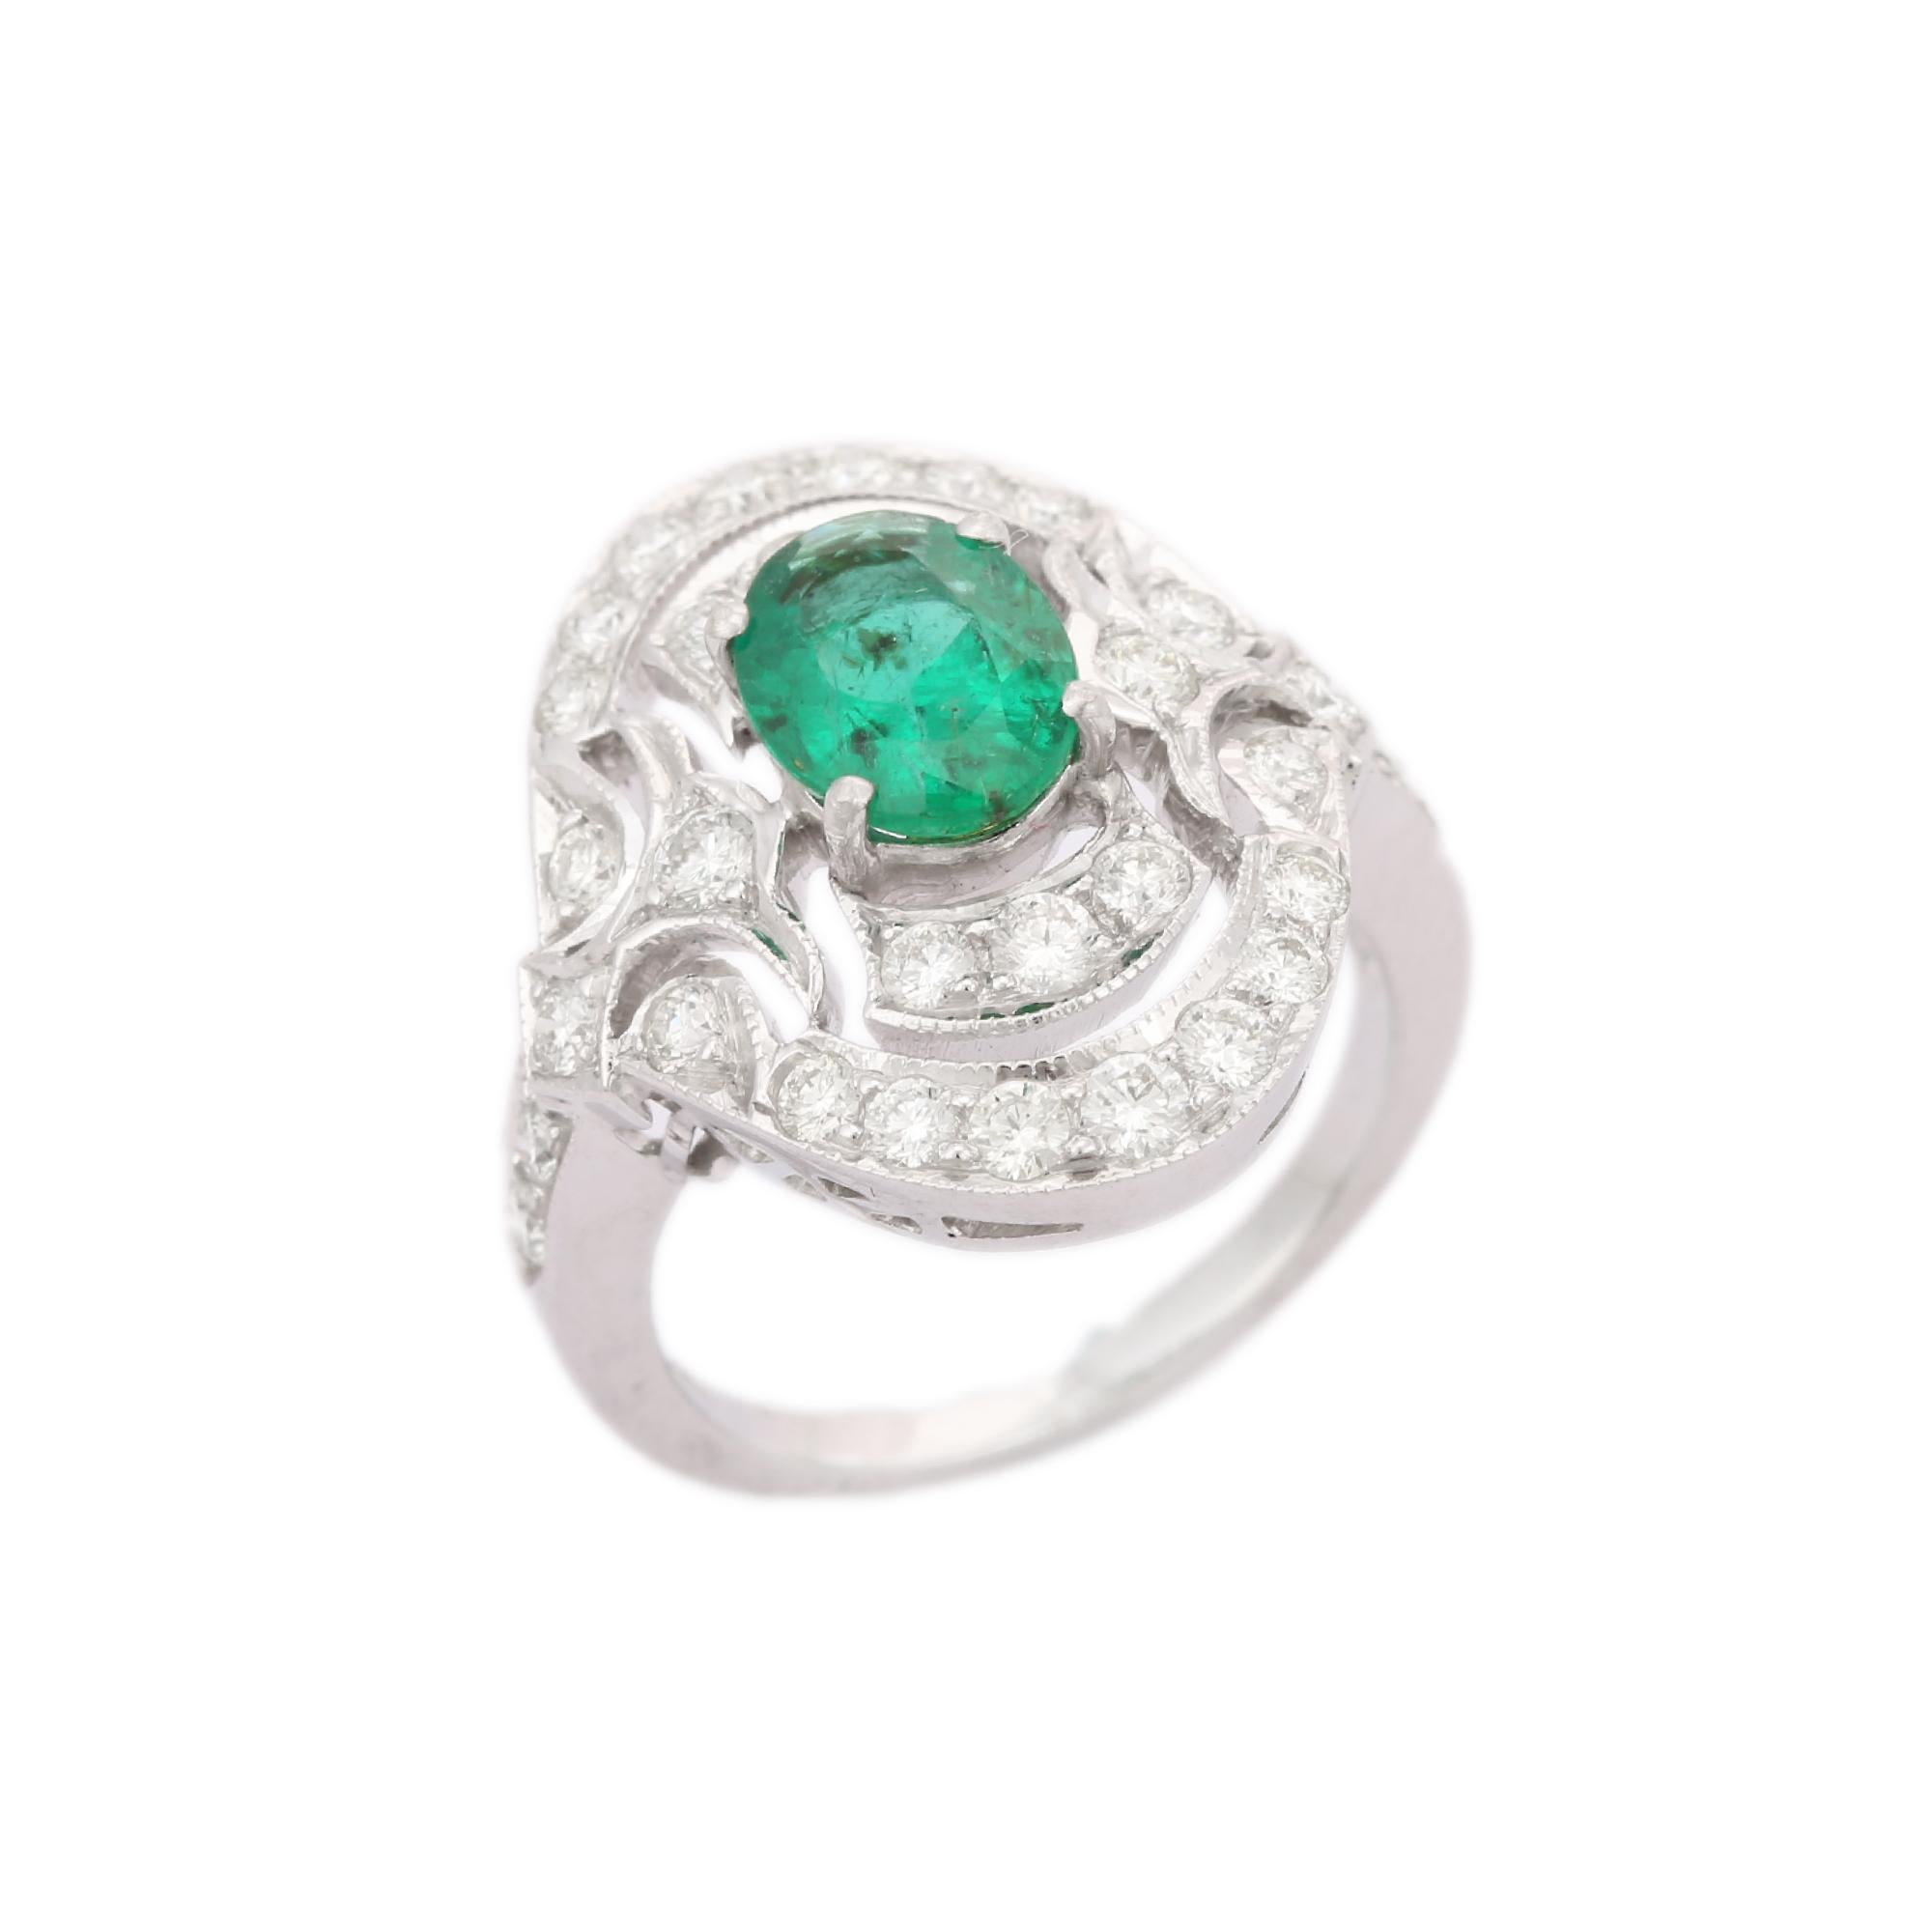 For Sale:  18kt Solid White Gold Art Deco Emerald Diamond Ring 2